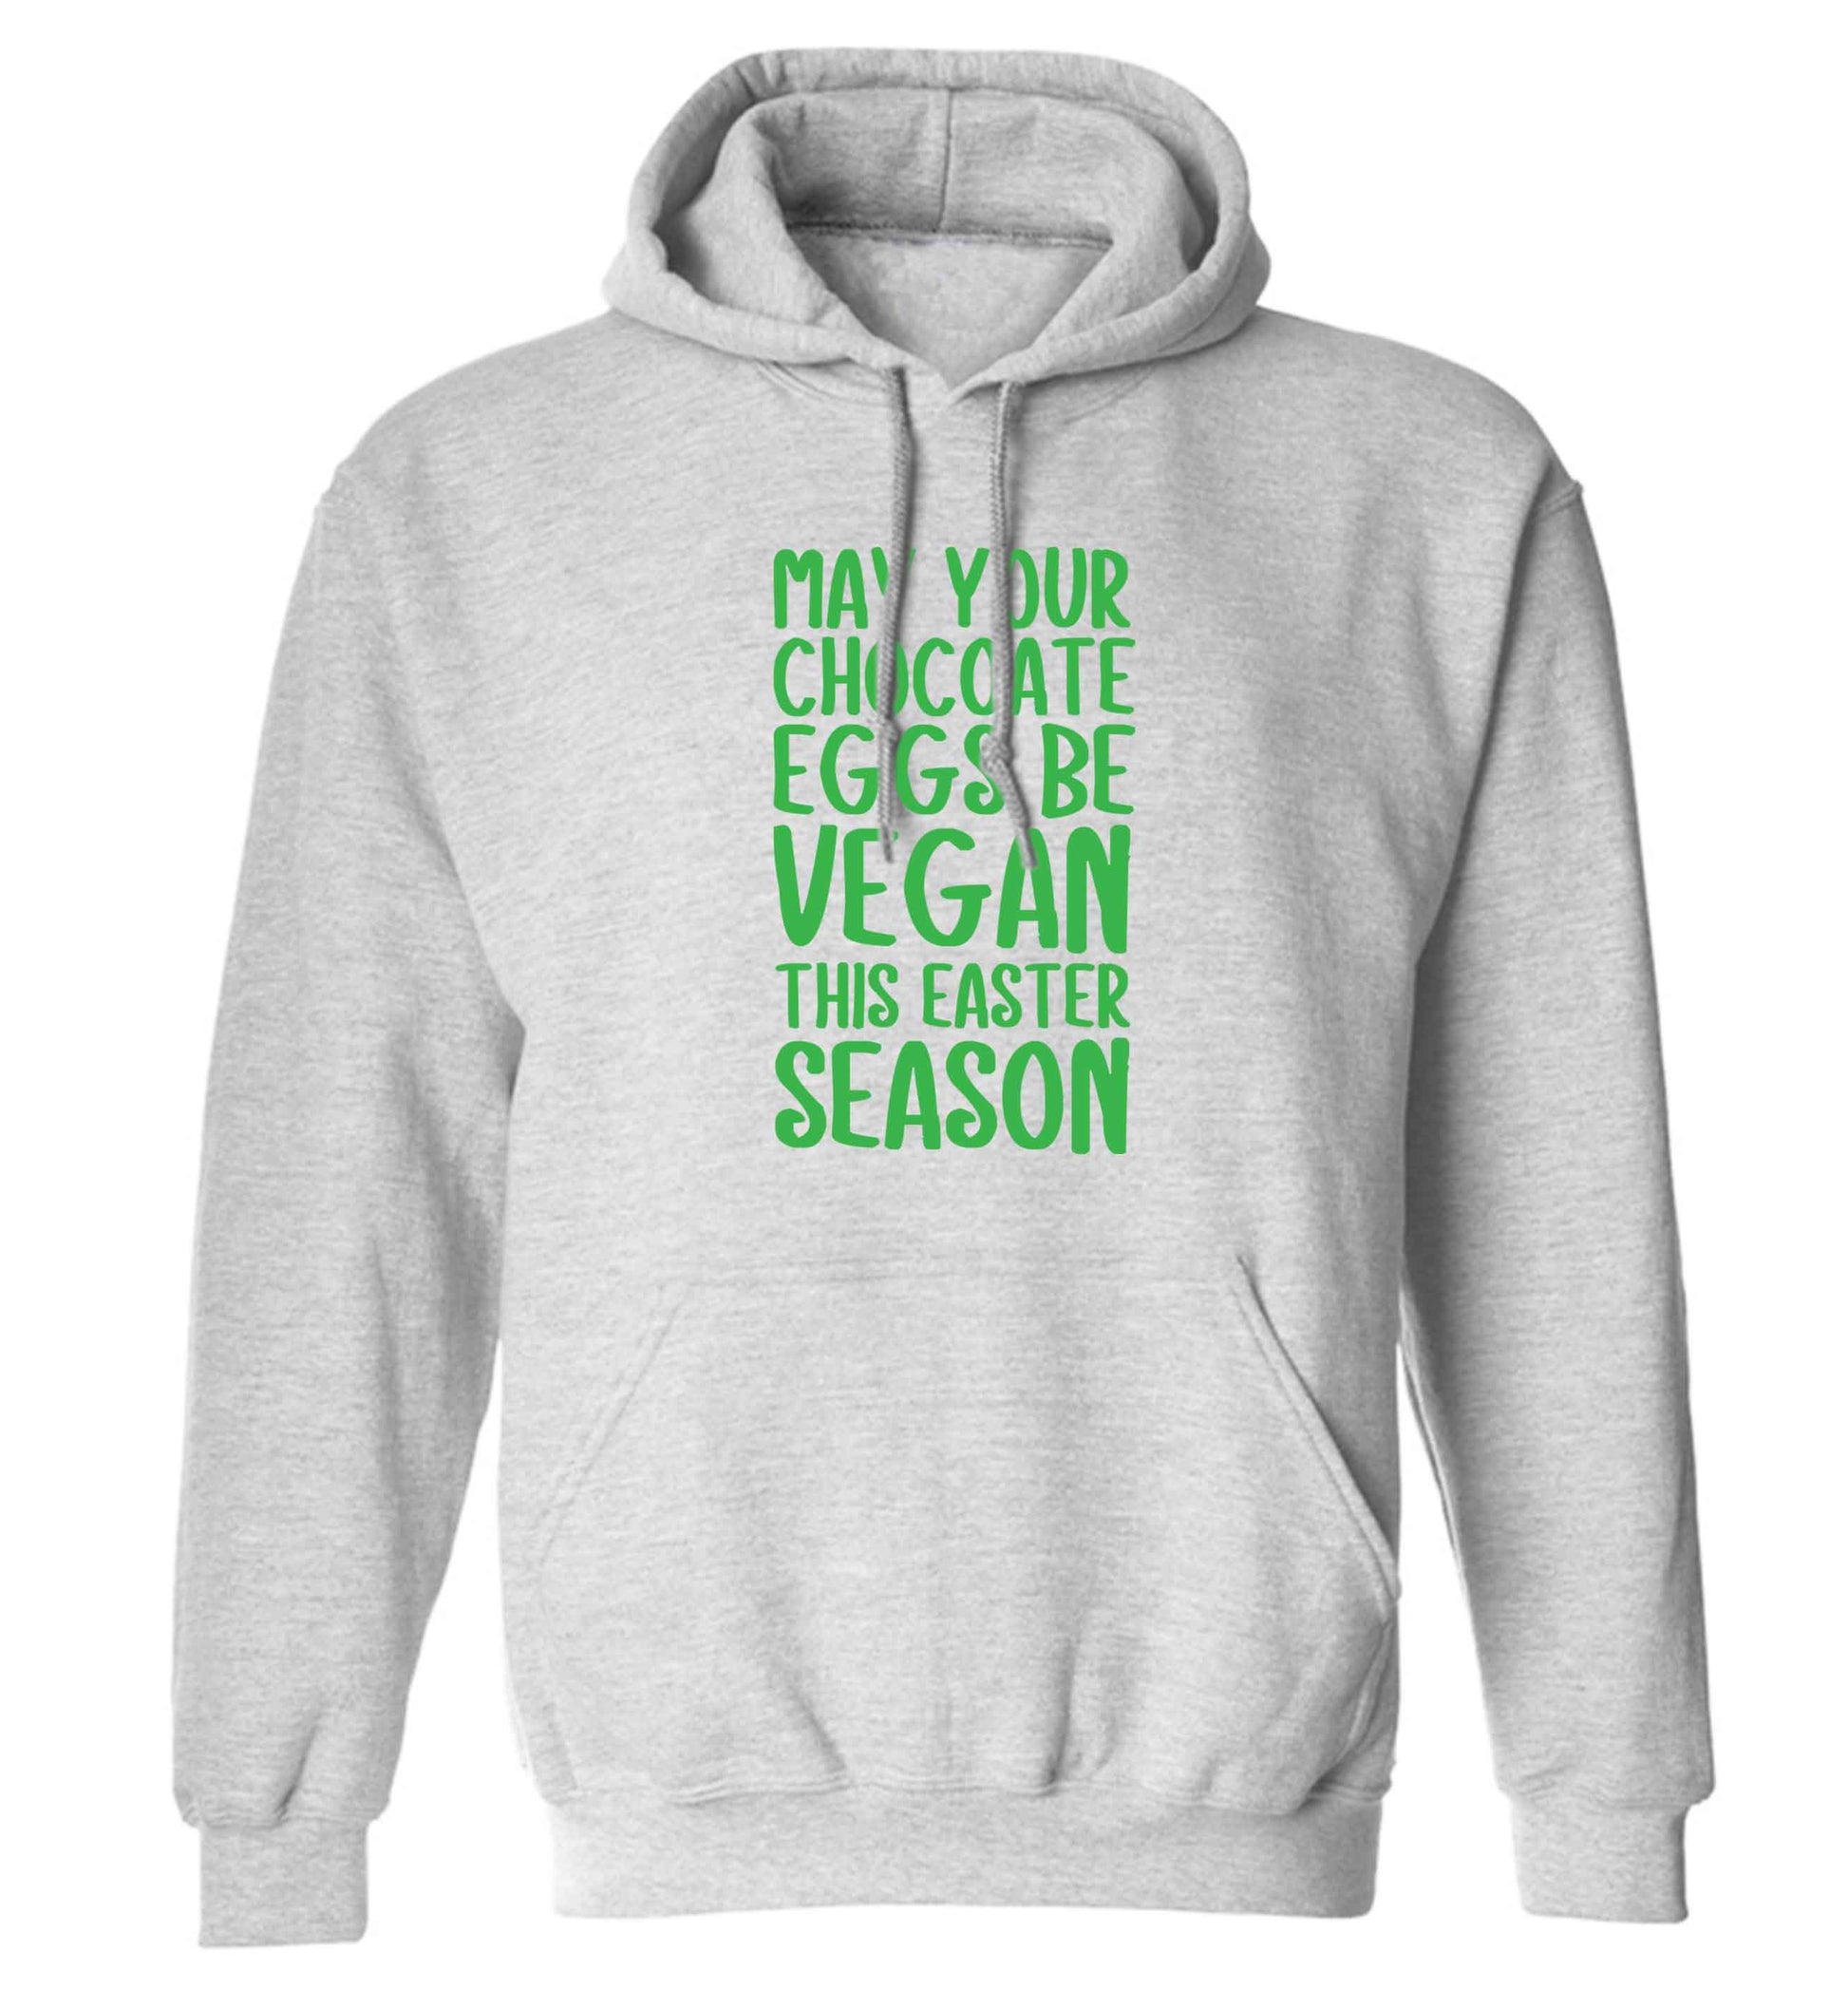 Easter bunny approved! Vegans will love this easter themed adults unisex grey hoodie 2XL